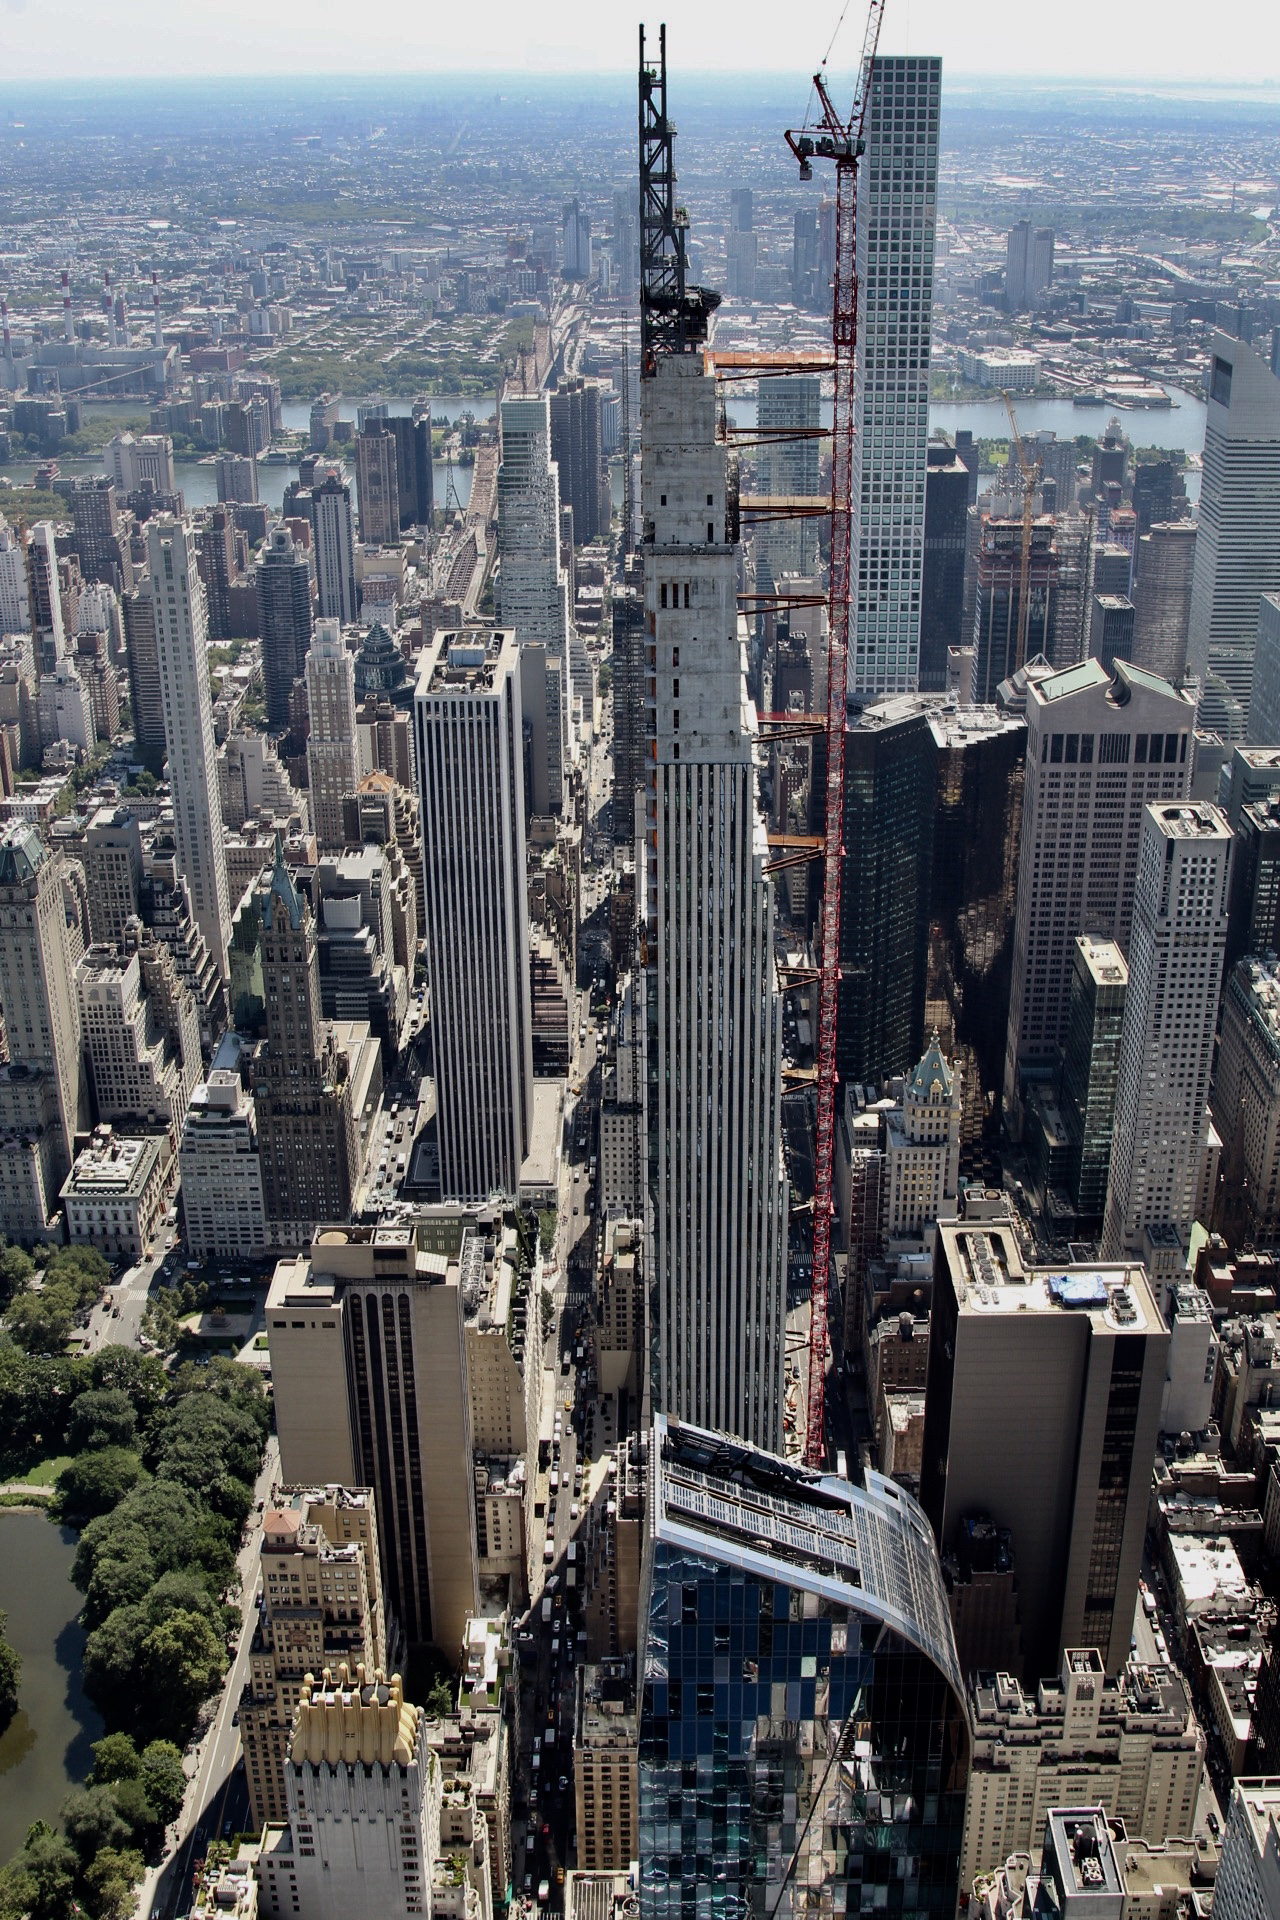 Central Park Tower Officially Tops Out 1,550 Feet Above Midtown